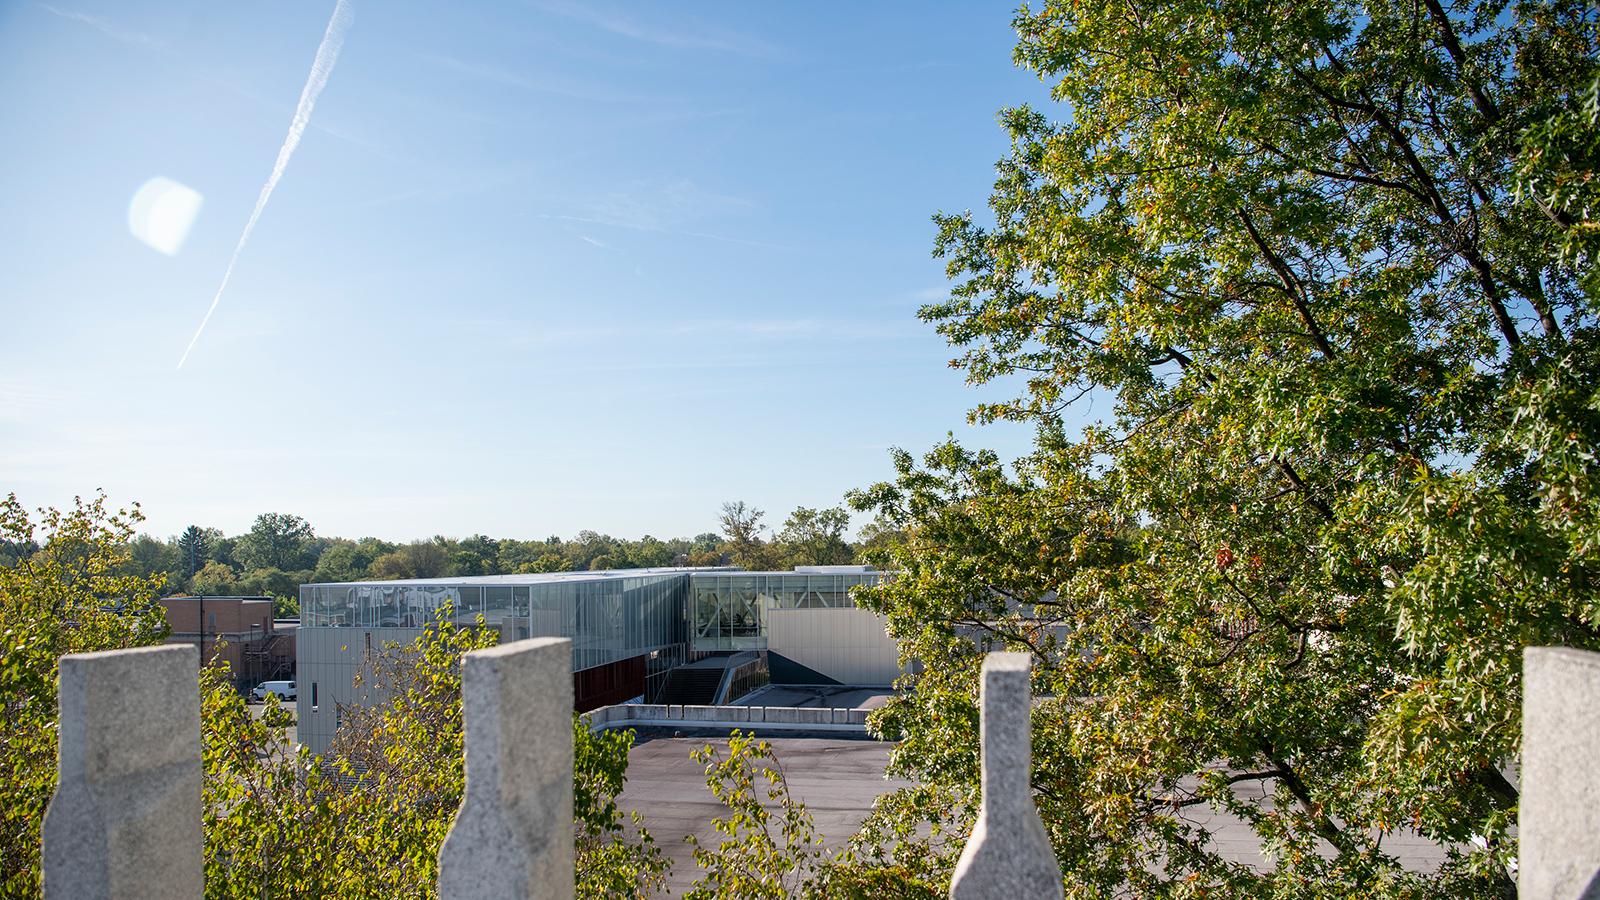 View of the Kohl building from the roof of Bibbins Hall.